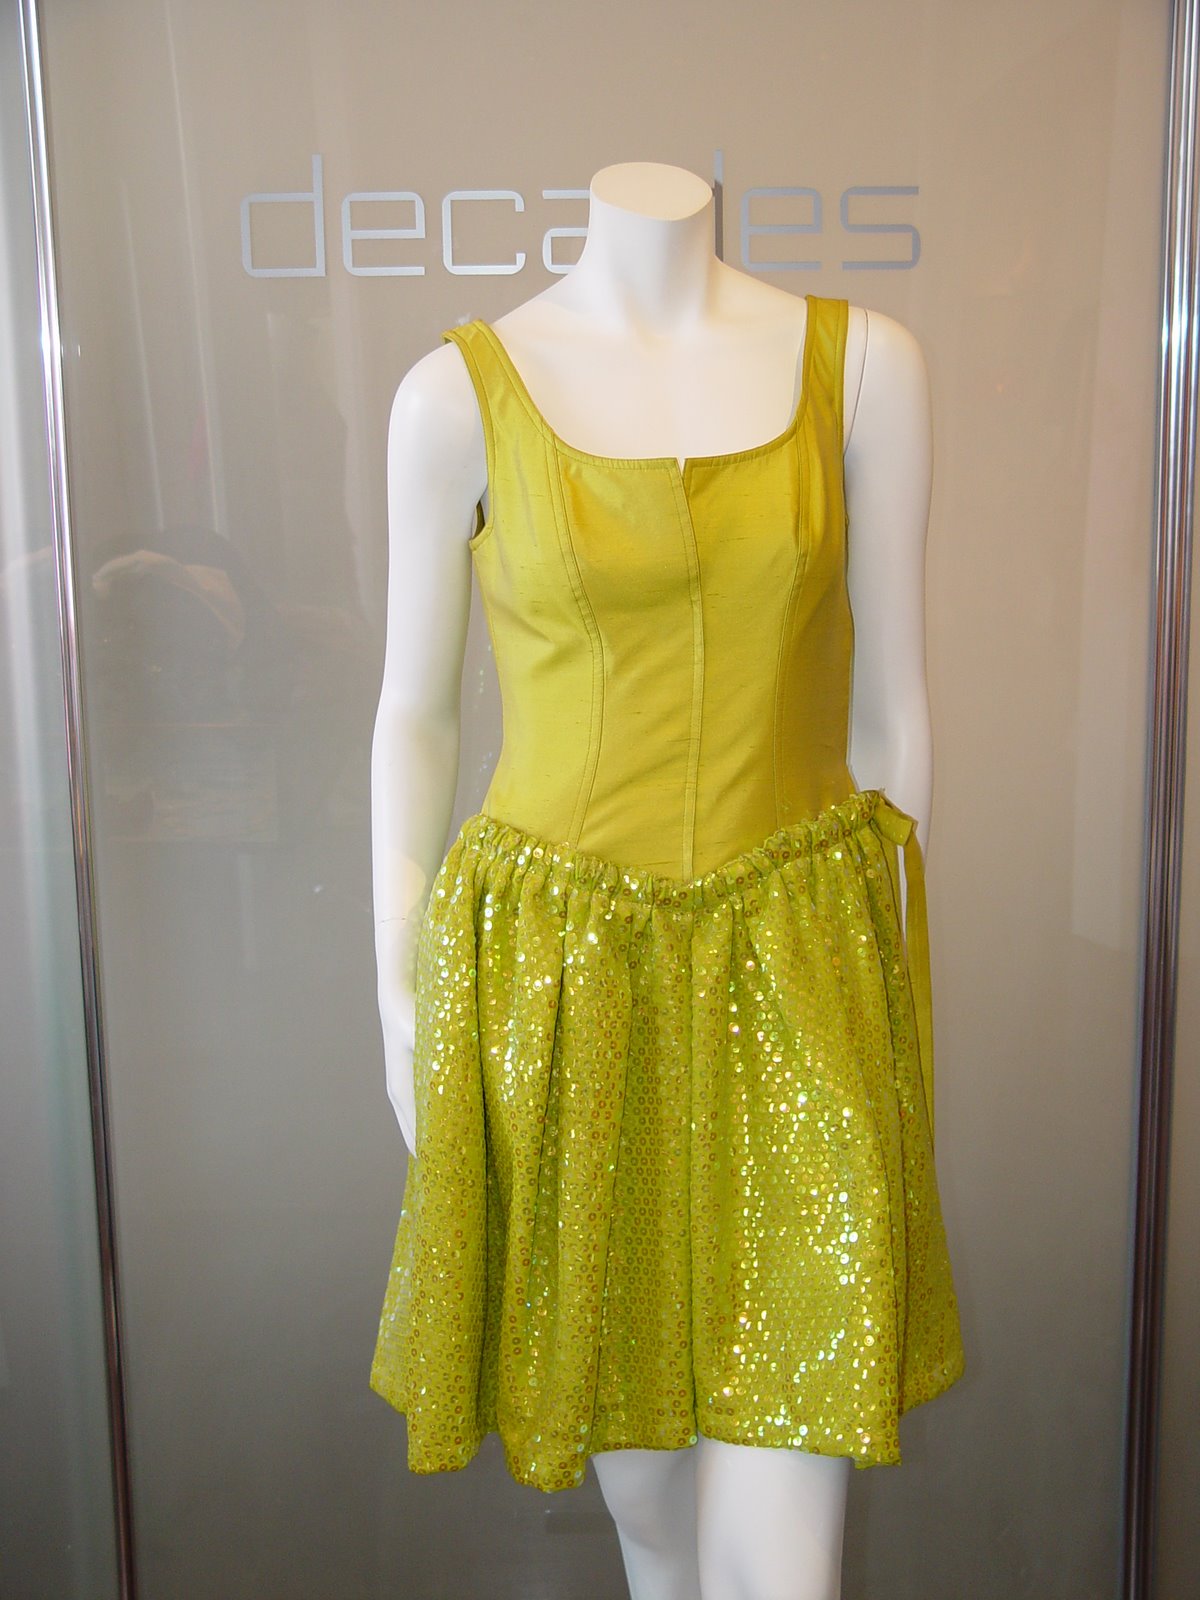 [CHRISTIAN+LACROIX+SUMMER+1995+LIME+DRESS+WITH+RAW+SILK+TOP+AND+PAILLETTE+SKIRT.JPG.JPG]